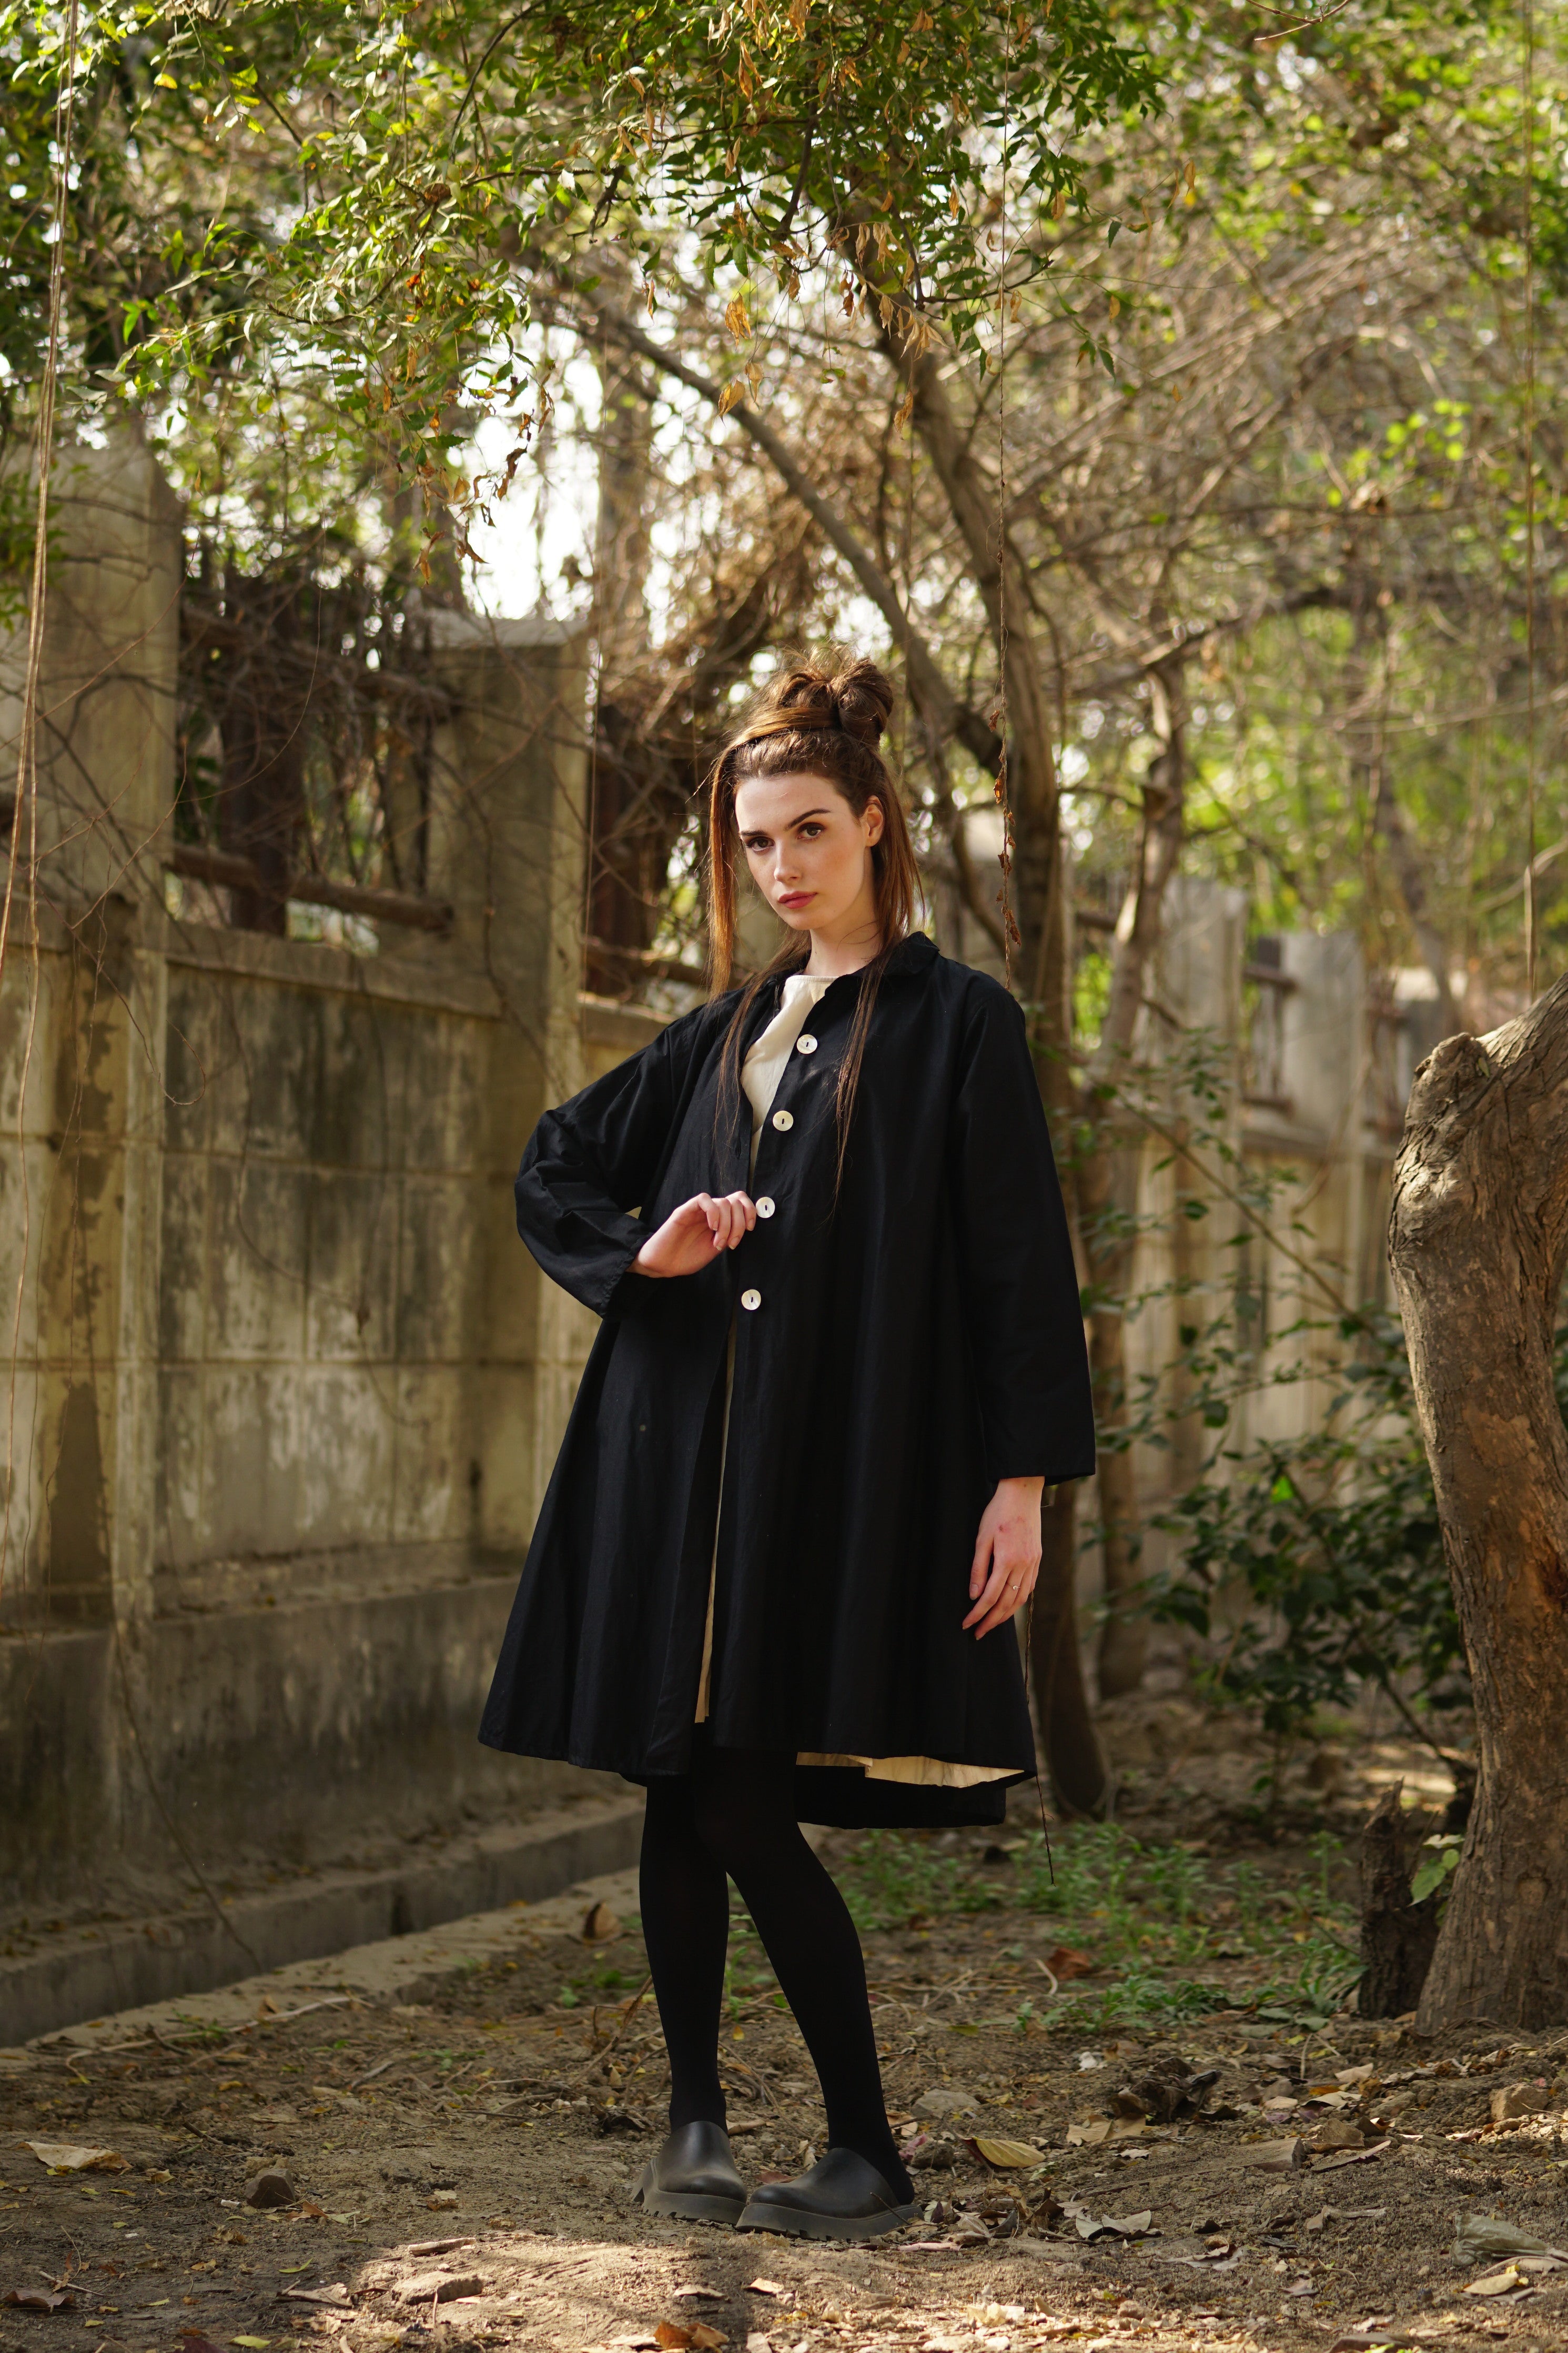 A MegbyDesign model is wearing a lined cotton twill black coat with large black spots featuring agoya shell buttons, side pockets and a classic cut collar